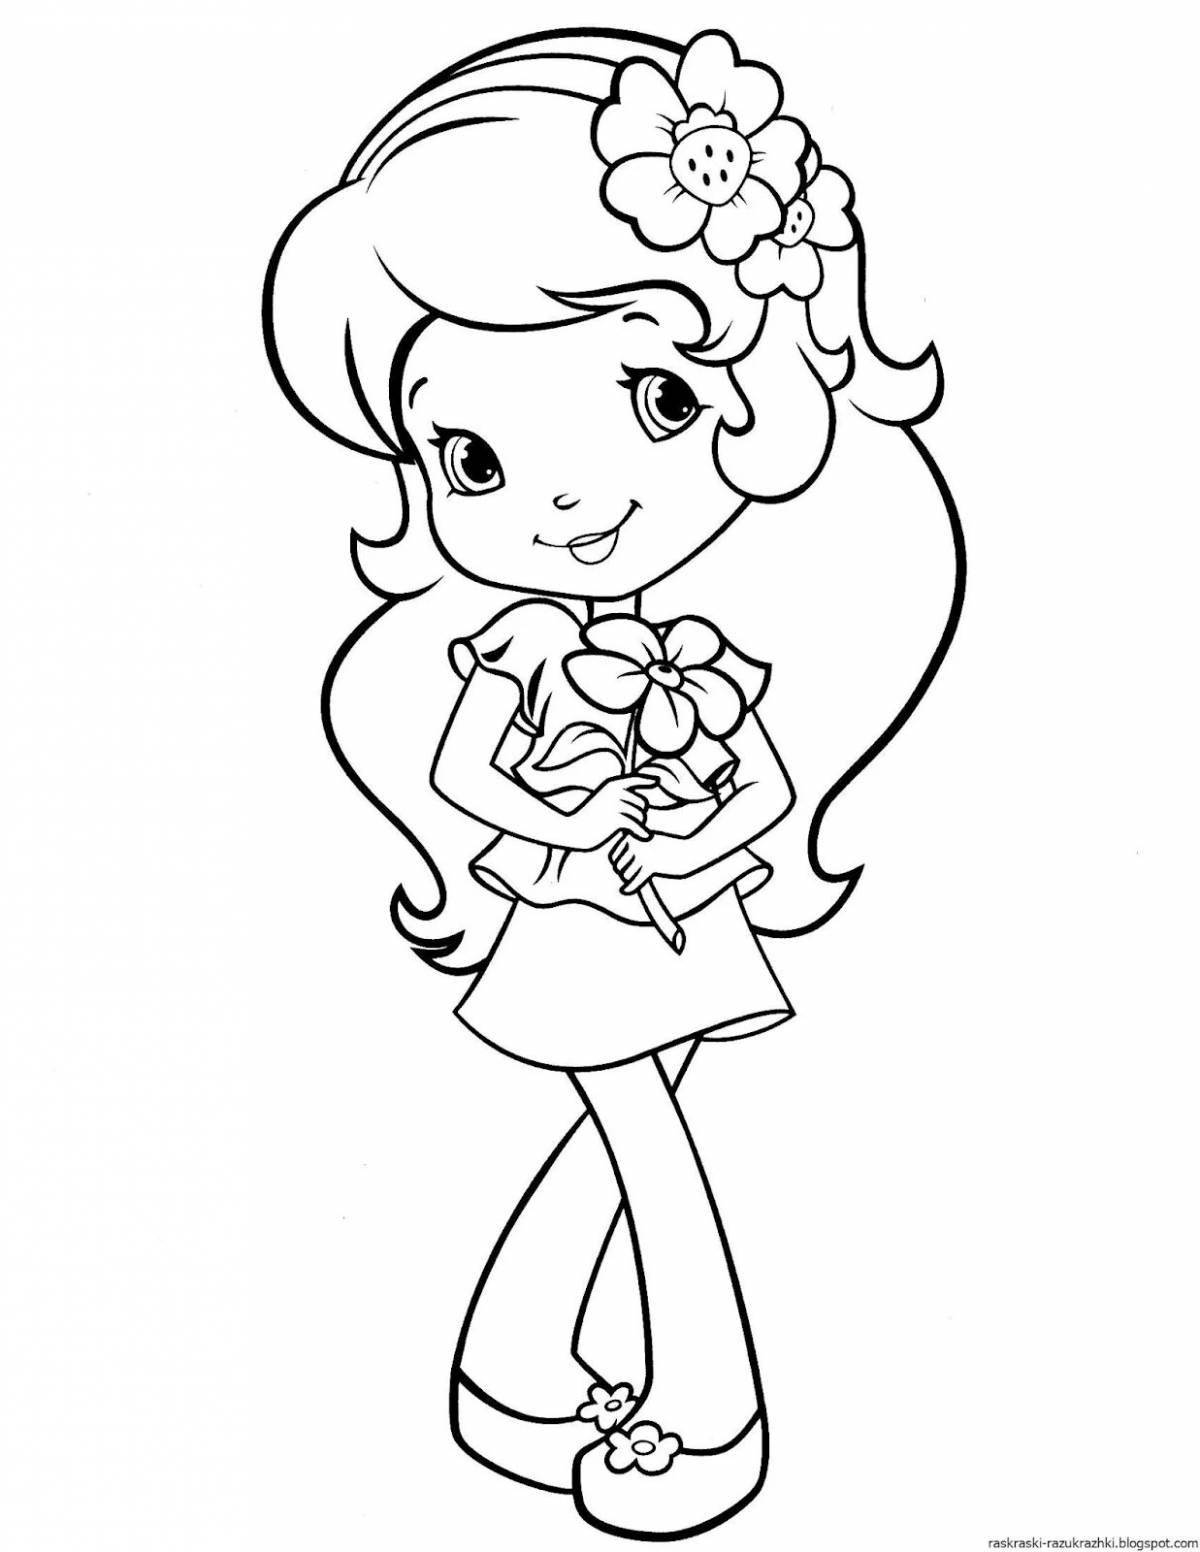 Charming bw coloring for girls